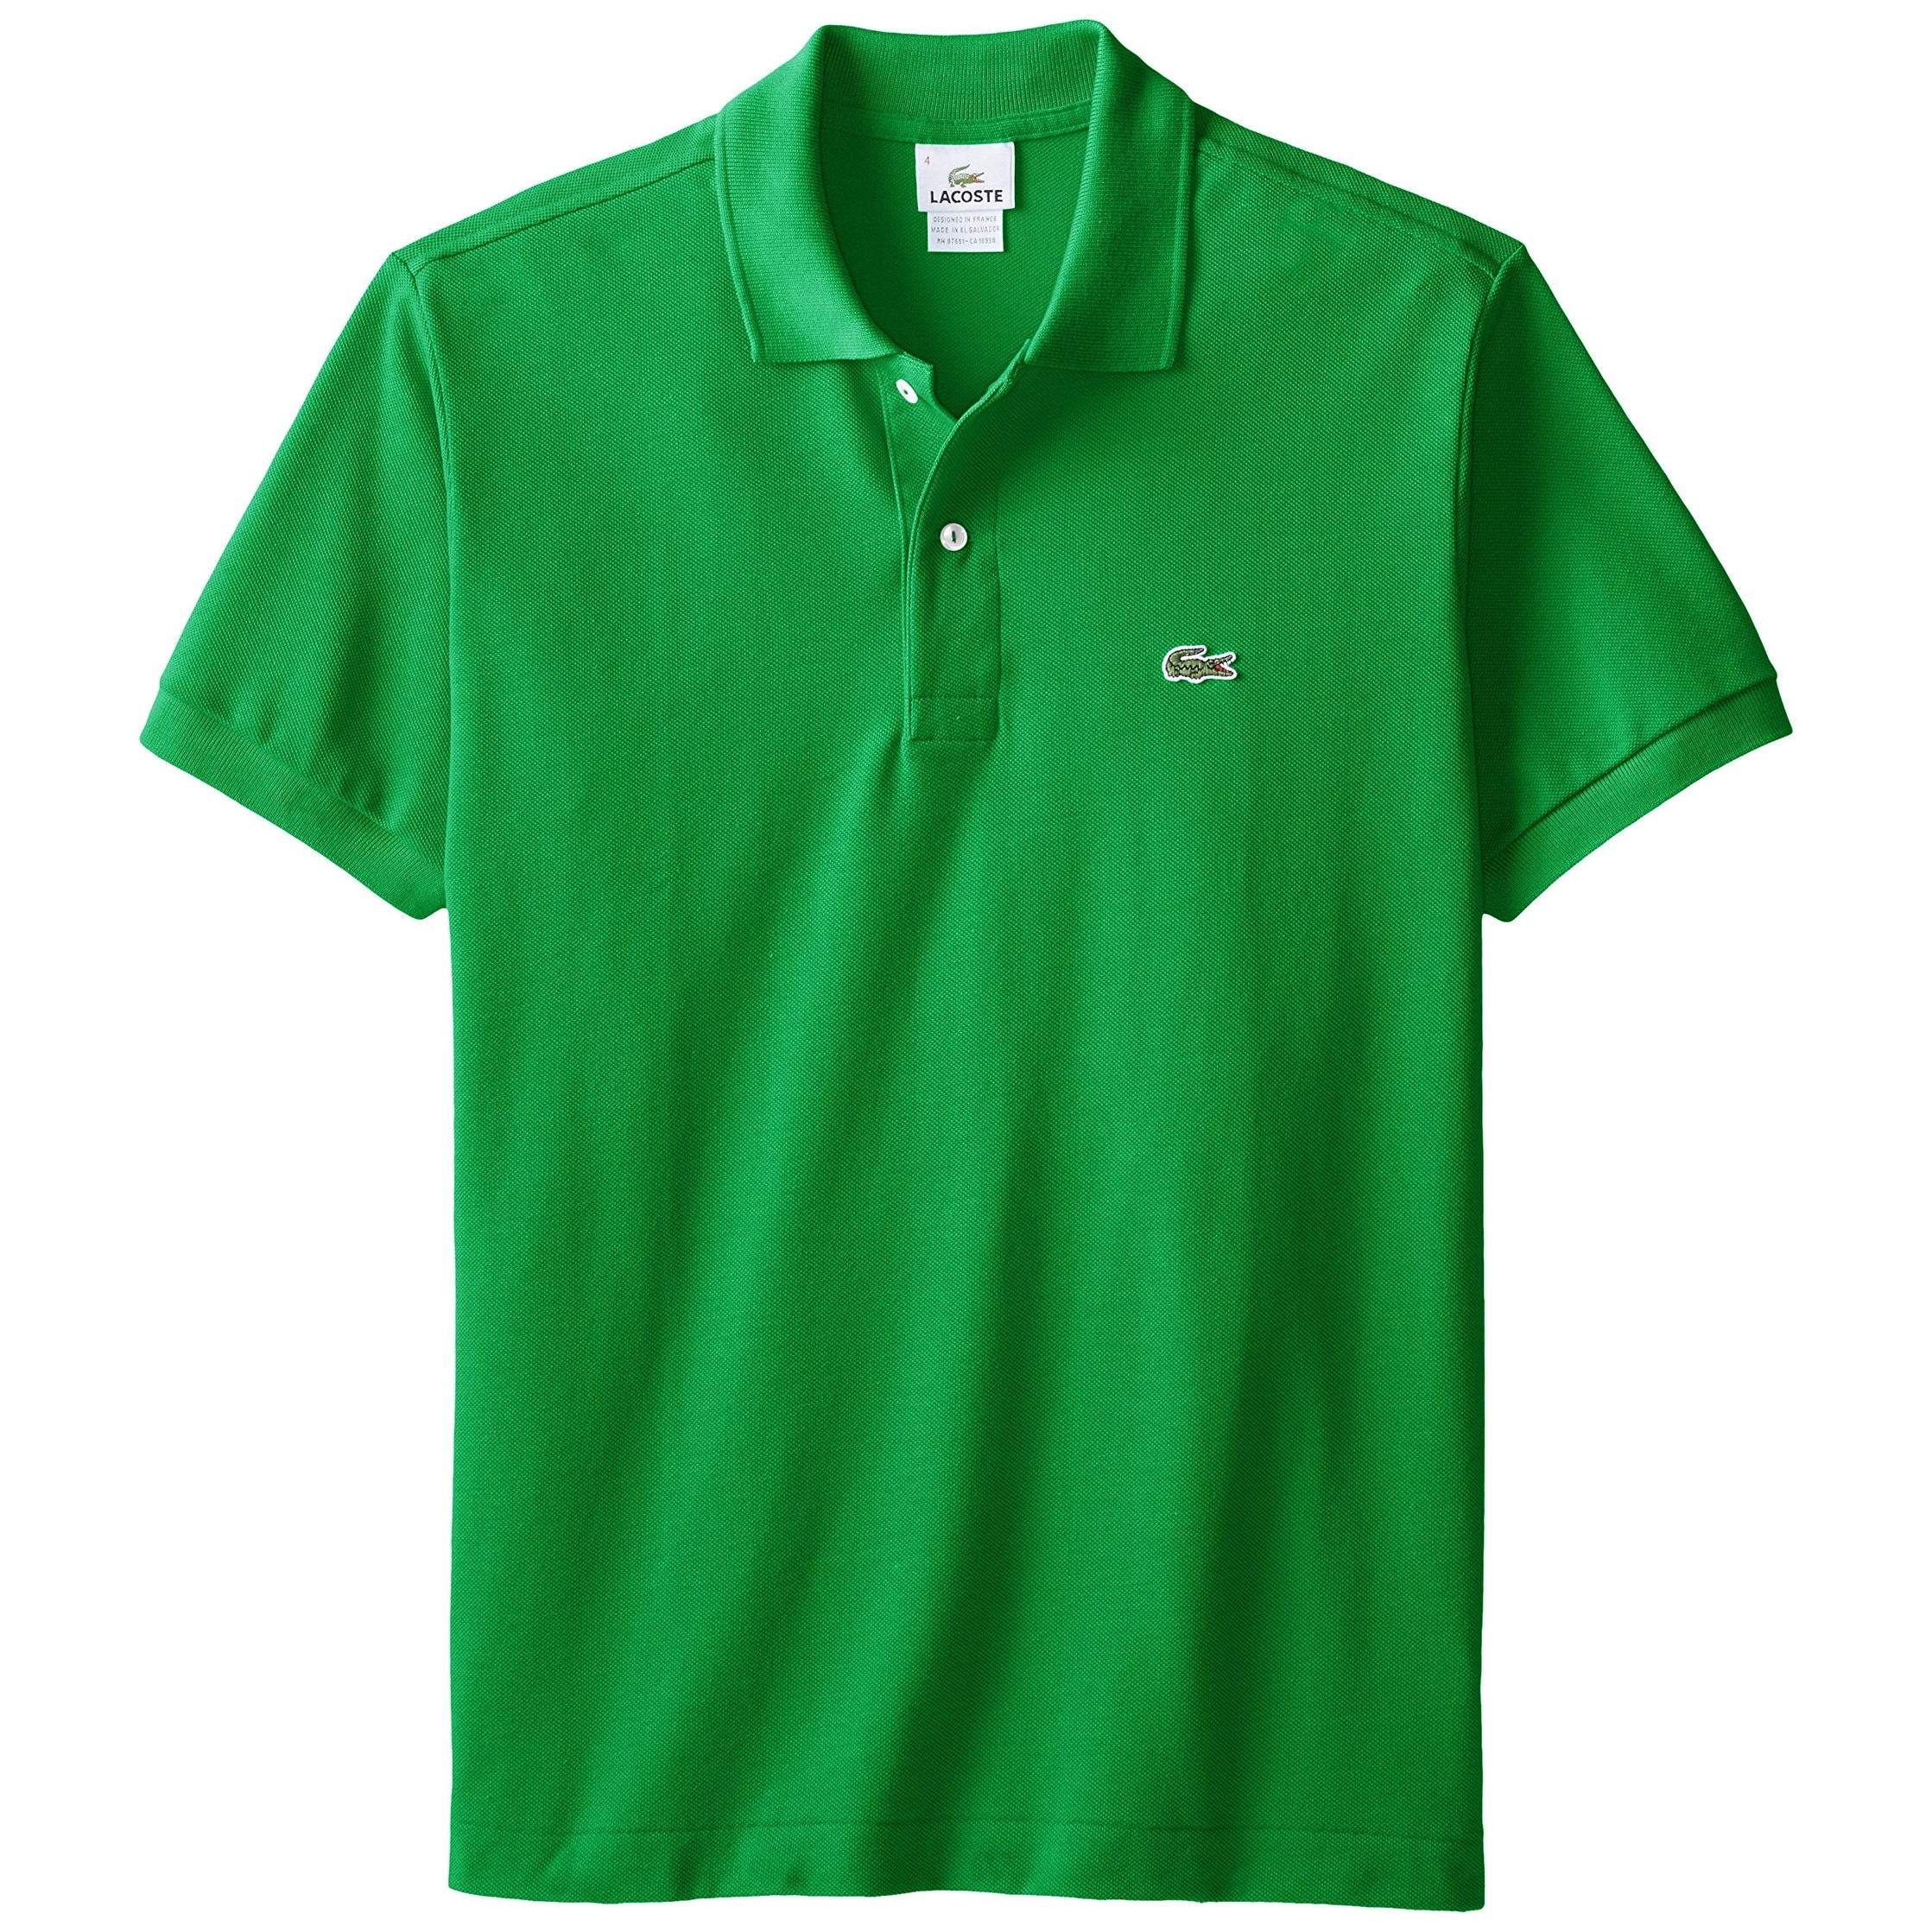 sports direct lacoste polo shirts